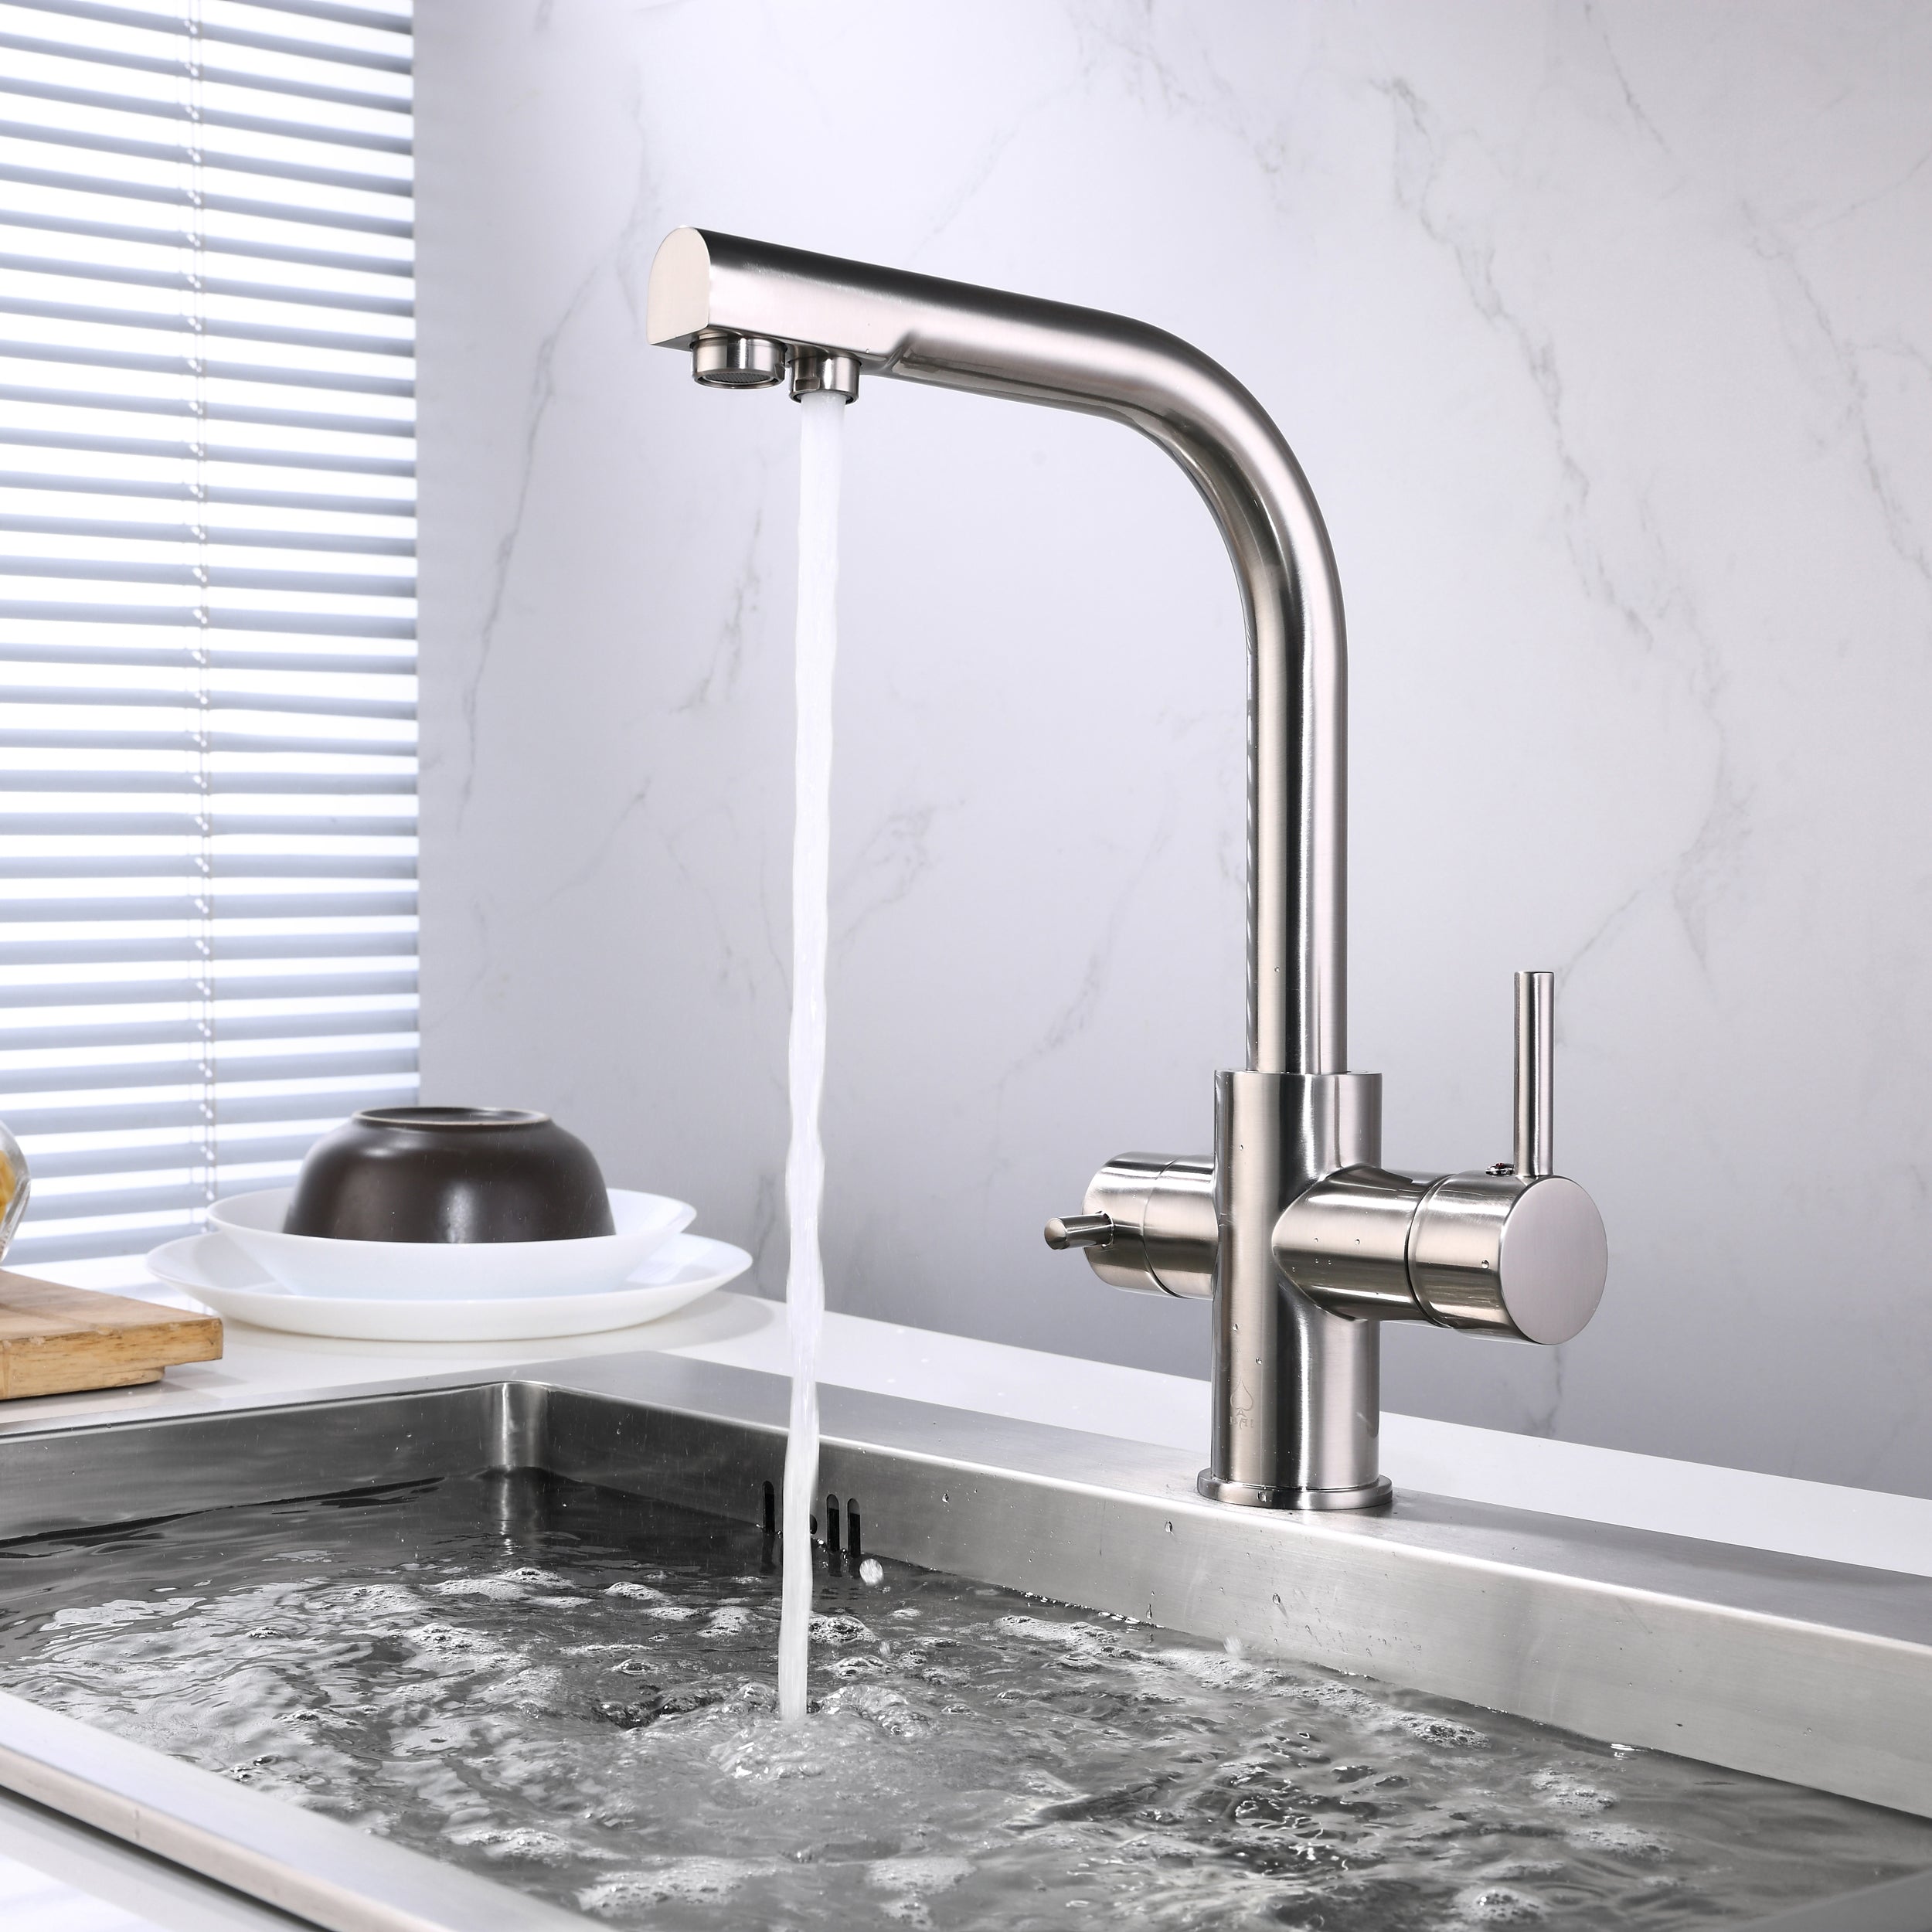 BAI 0664 Kitchen Faucet with Integrated Drinking Water ...